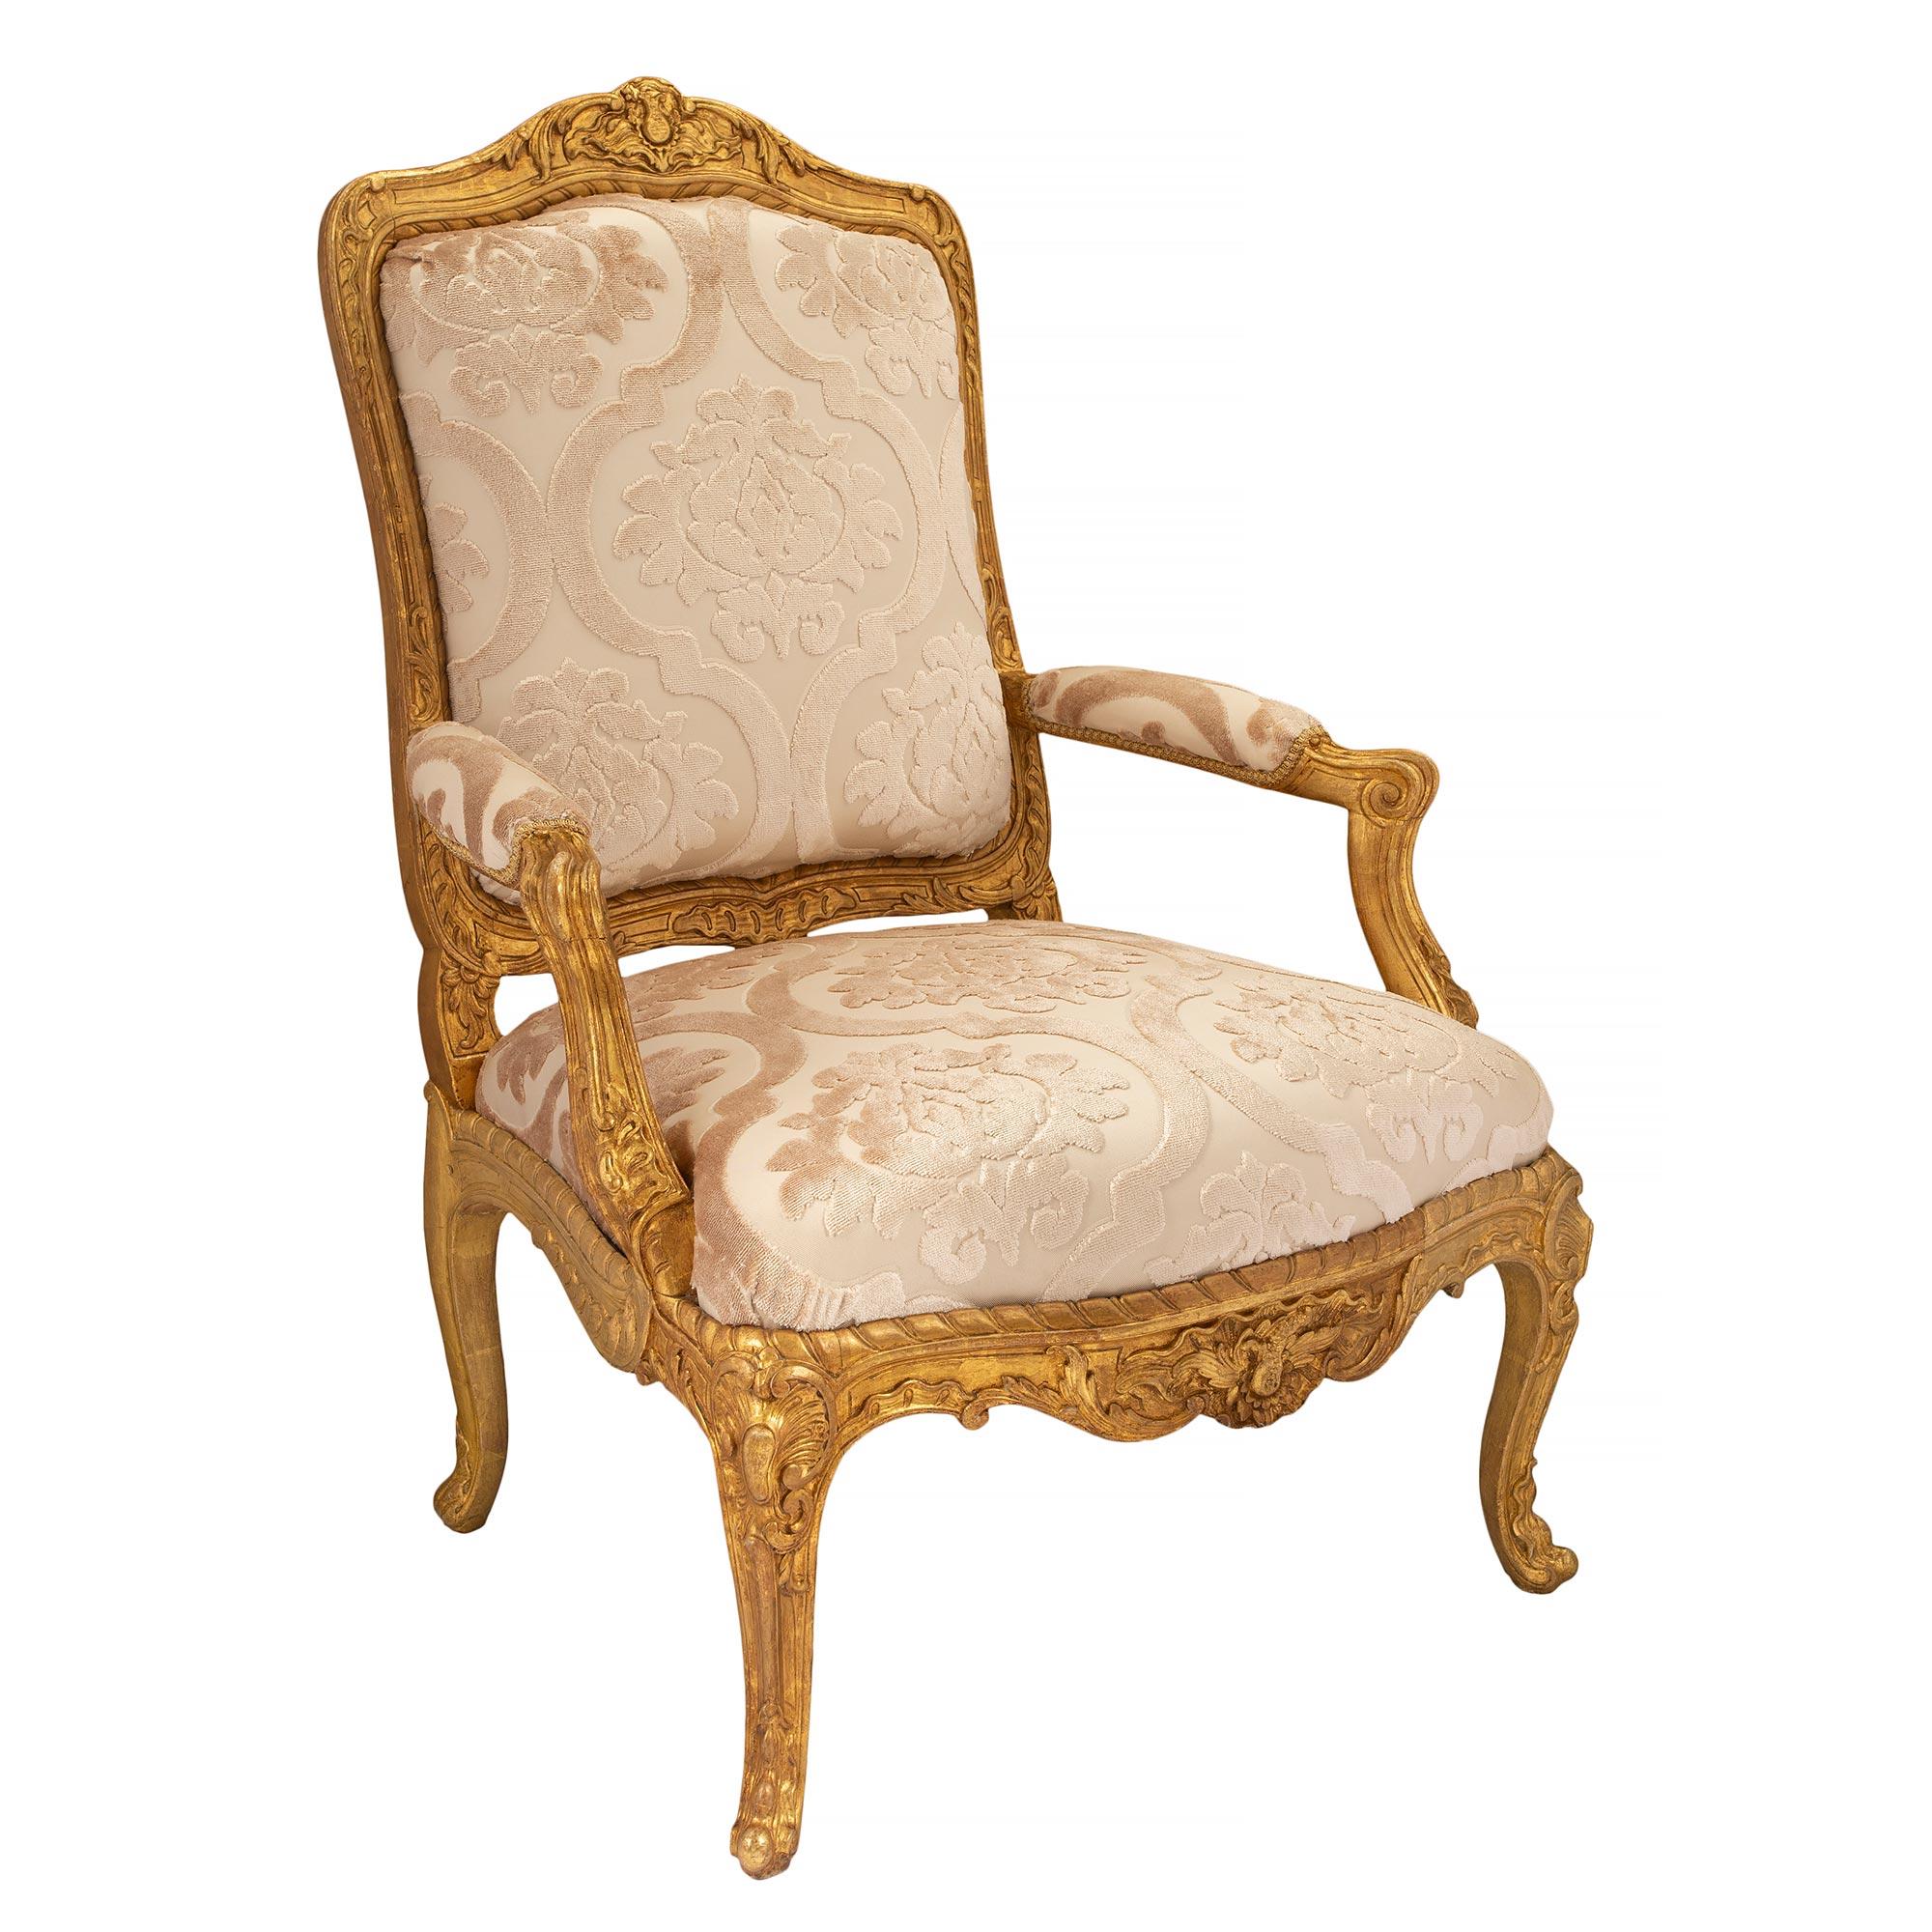 A beautiful and high quality pair of French early 19th century Louis XV st. giltwood armchairs. Each armchair is raised by elegant cabriole legs with lovely carved foliate designs and finely carved cabochons at each corner. The decorative arbalest